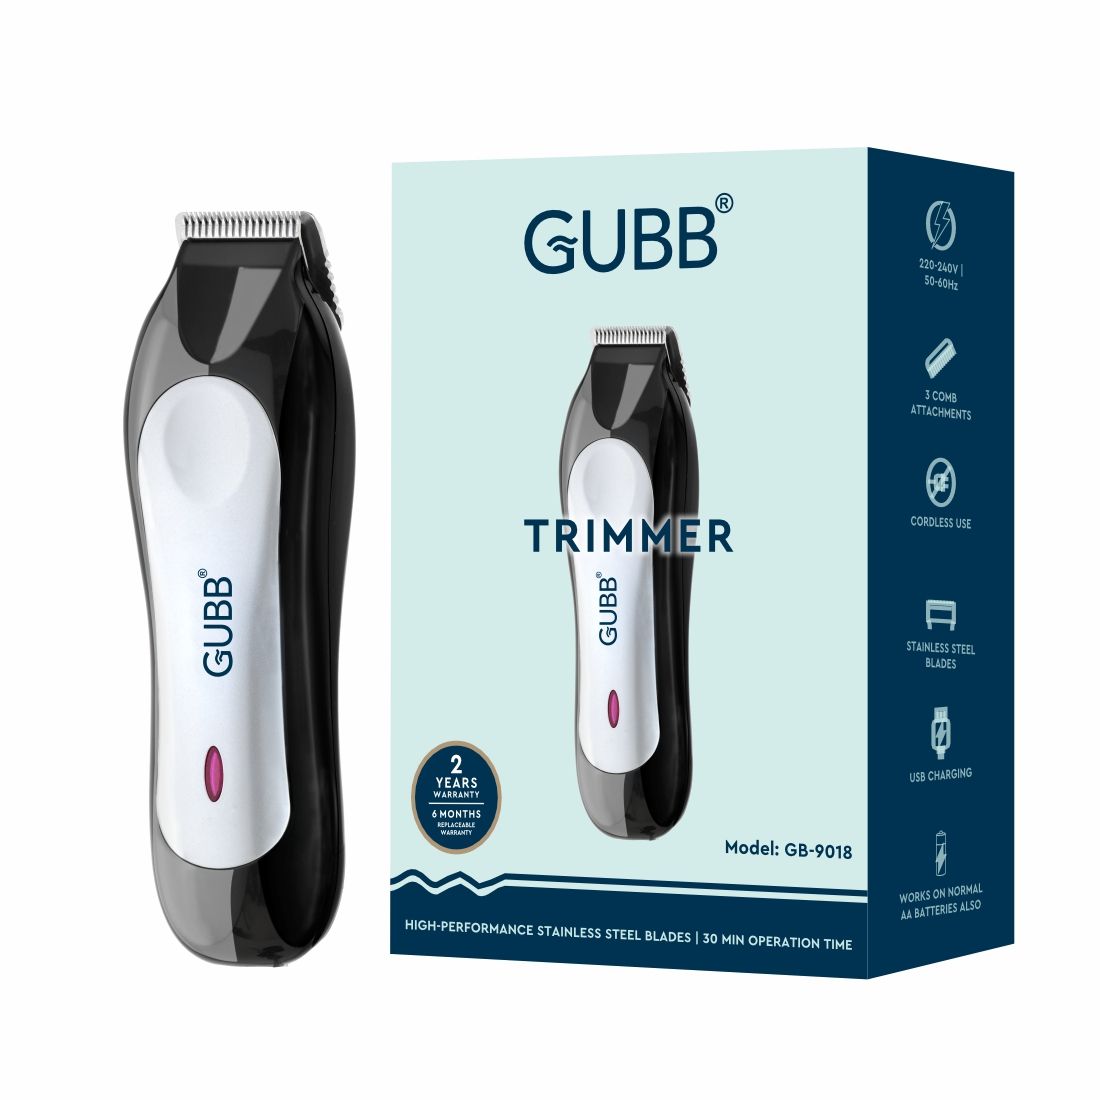 GUBB GB-9018 Instant Skin protecting Beard Trimmer - 360 Degrees Rotating Blades With USB Charging